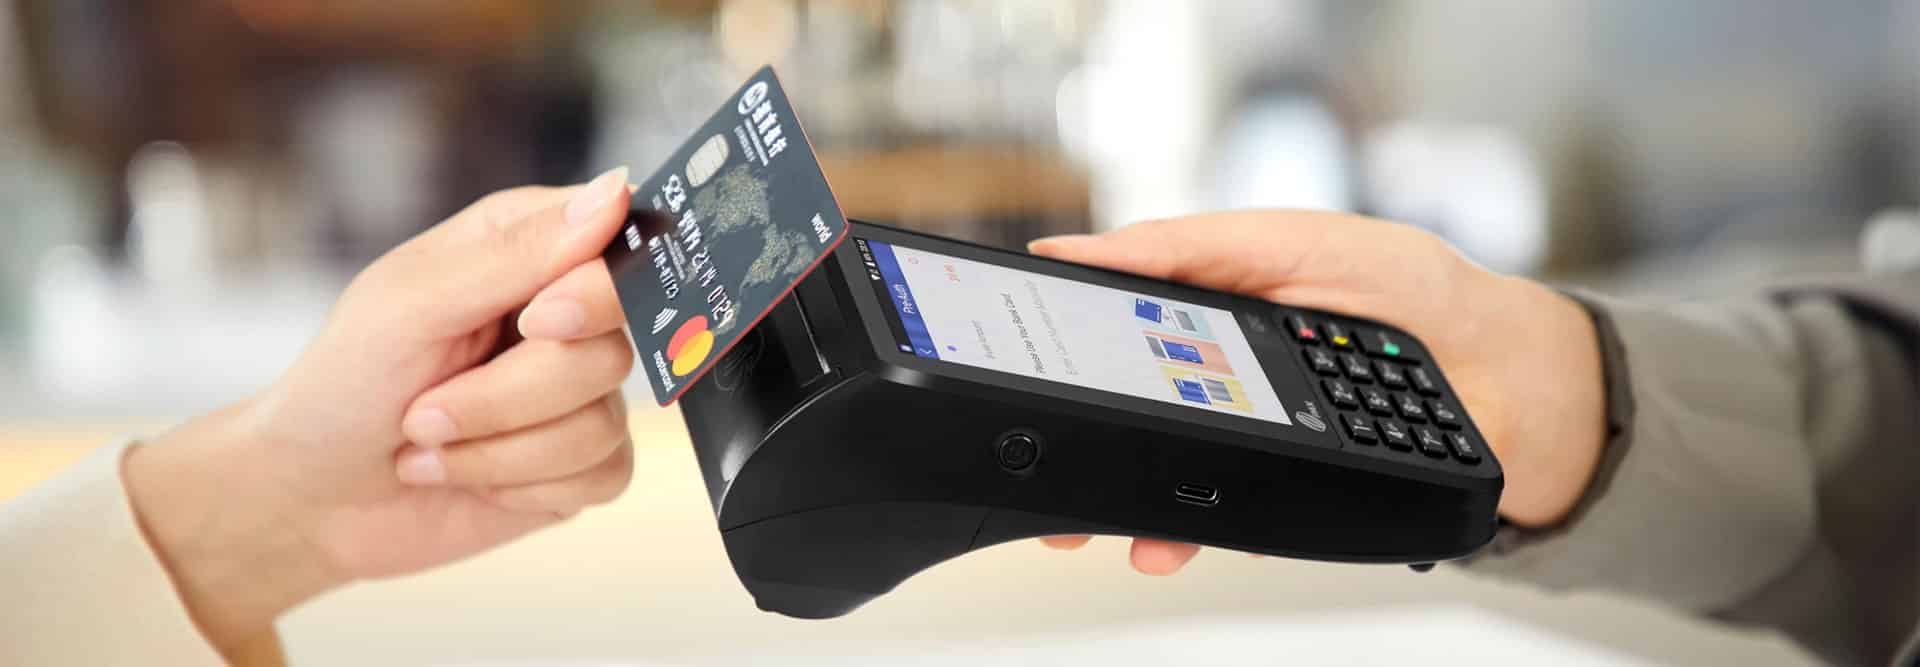 S920 credit card payment